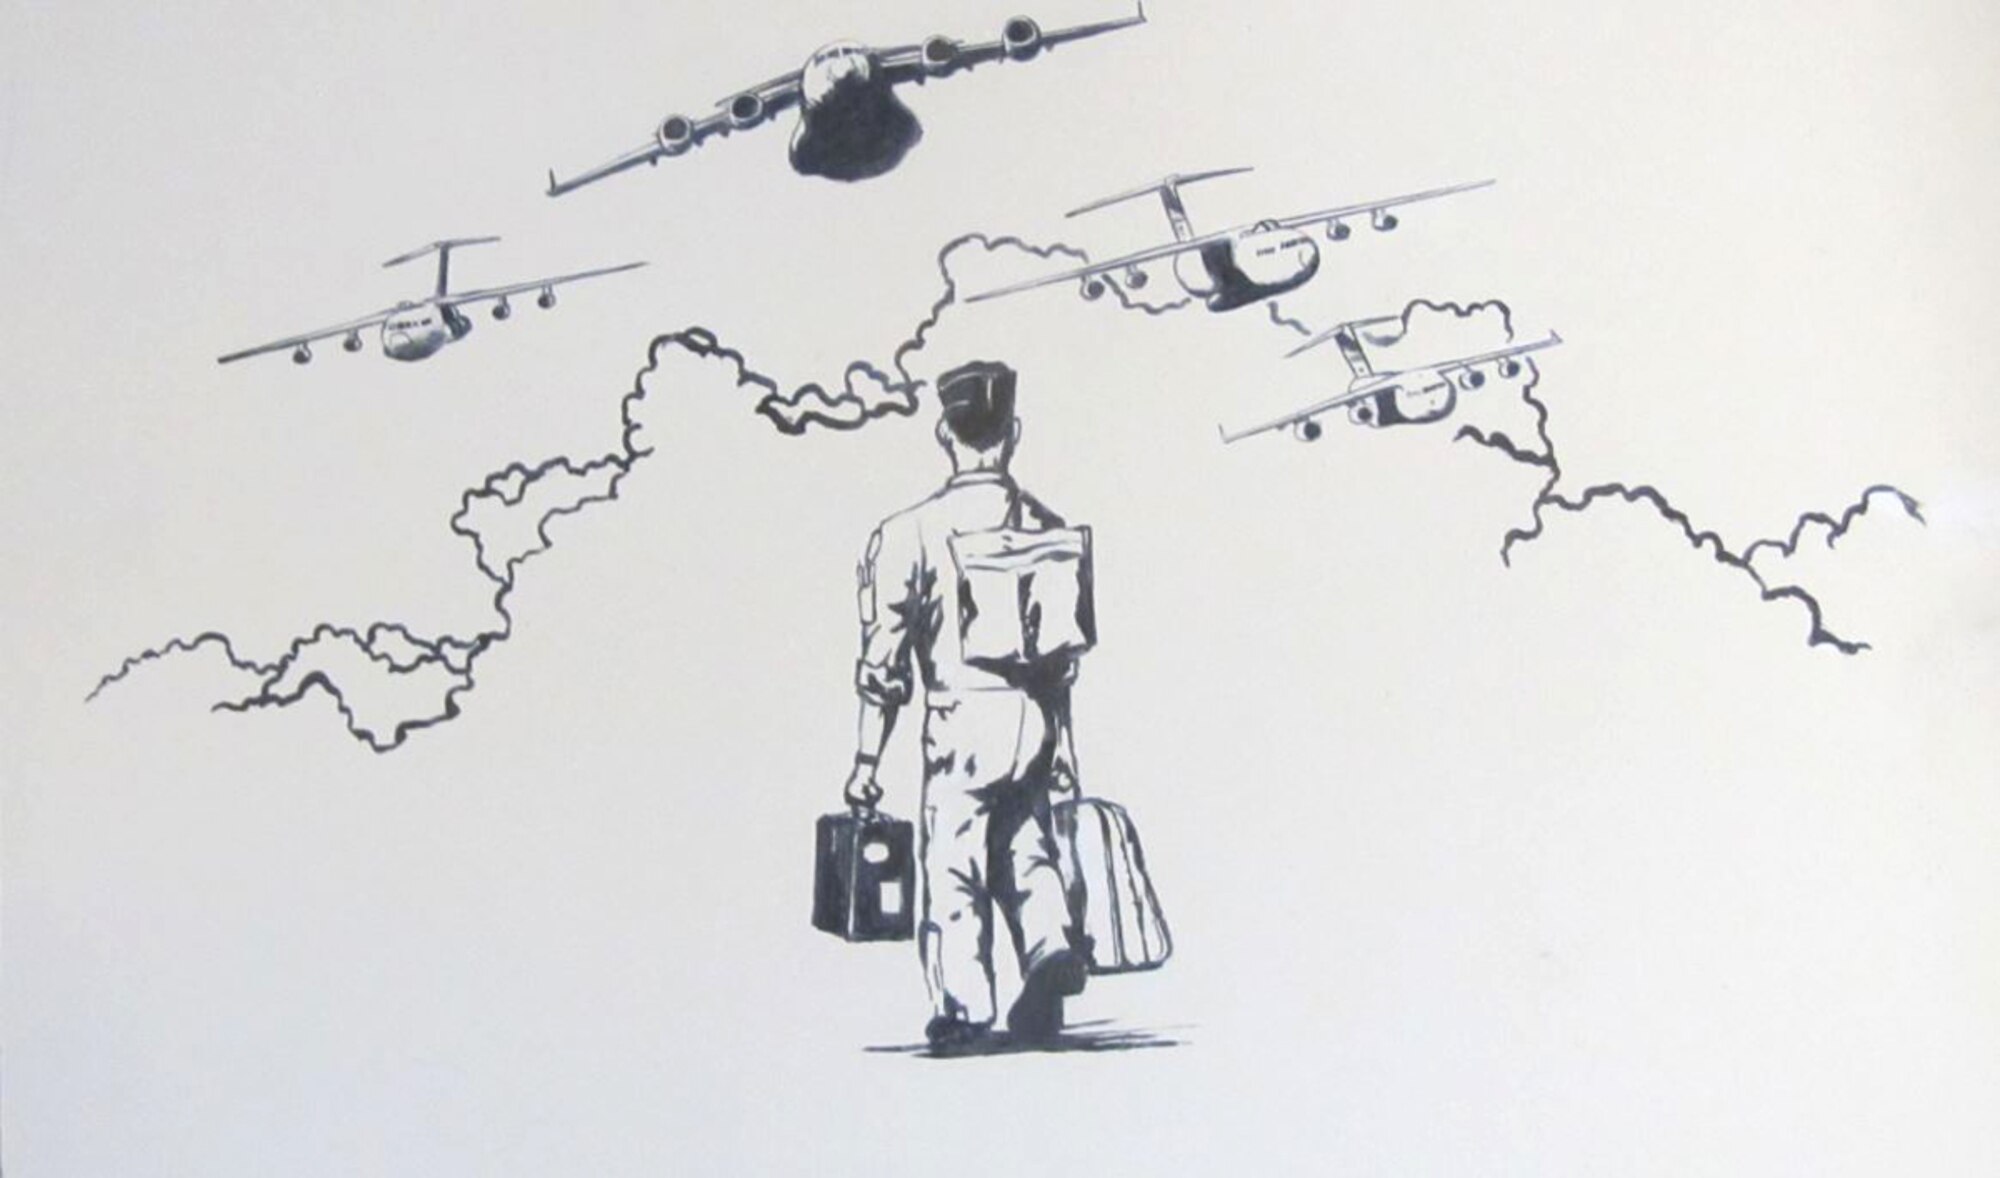 The artwork accompanying this article is the result of his creative talents and the ideas Mary wanted as a tribute to her late husband Master Sgt. Dan Daiber of the 701st Airlift Squadron.  The Airman is walking away from friends and family.  He’ll be joined by others soon, but he’ll not come home from this journey as before.  As he humbly walks away, he just begins to notice; approaching him is a formation of 17’s and 141’s.  The C-17 is just beginning to pitch up in salute to a life well lived as a fellow crewmember, squadron buddy, father, friend, son, husband and patriot. (art courtesy Senior Master Sgt. Darby Perrin)